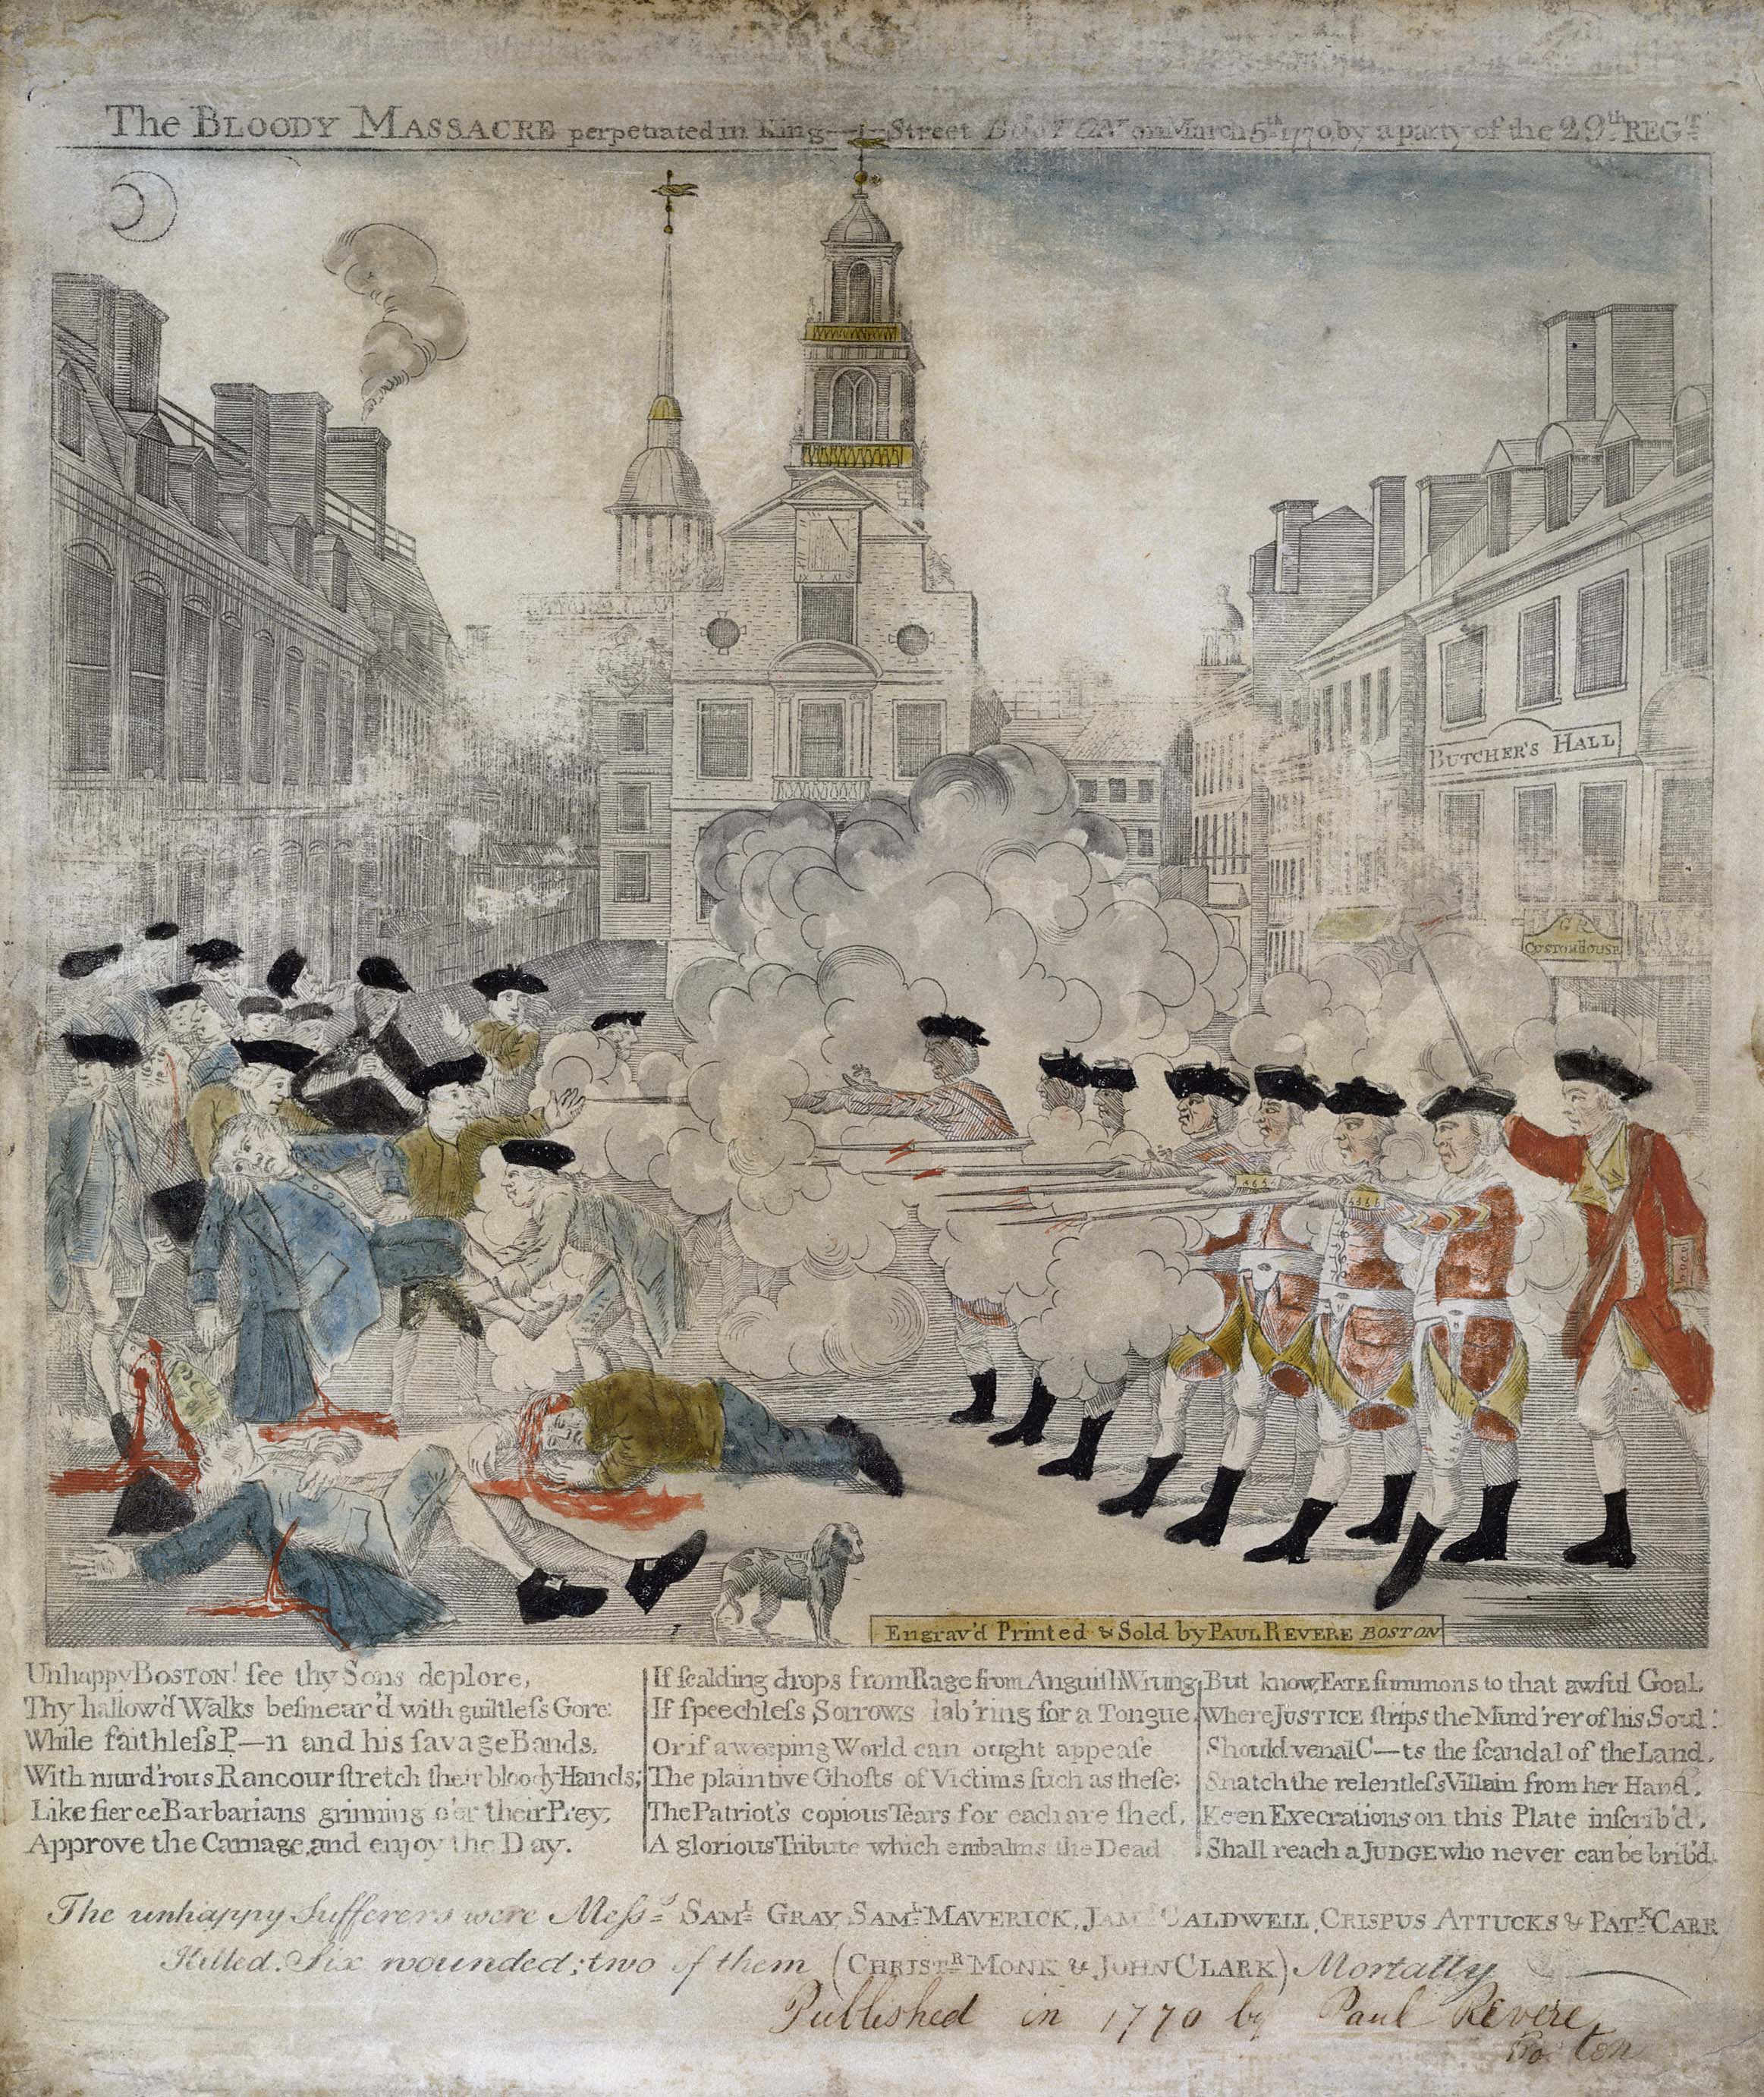 How Did Women Gain the Vote?: The Promise of 1776 for Women - Museum of the  American Revolution